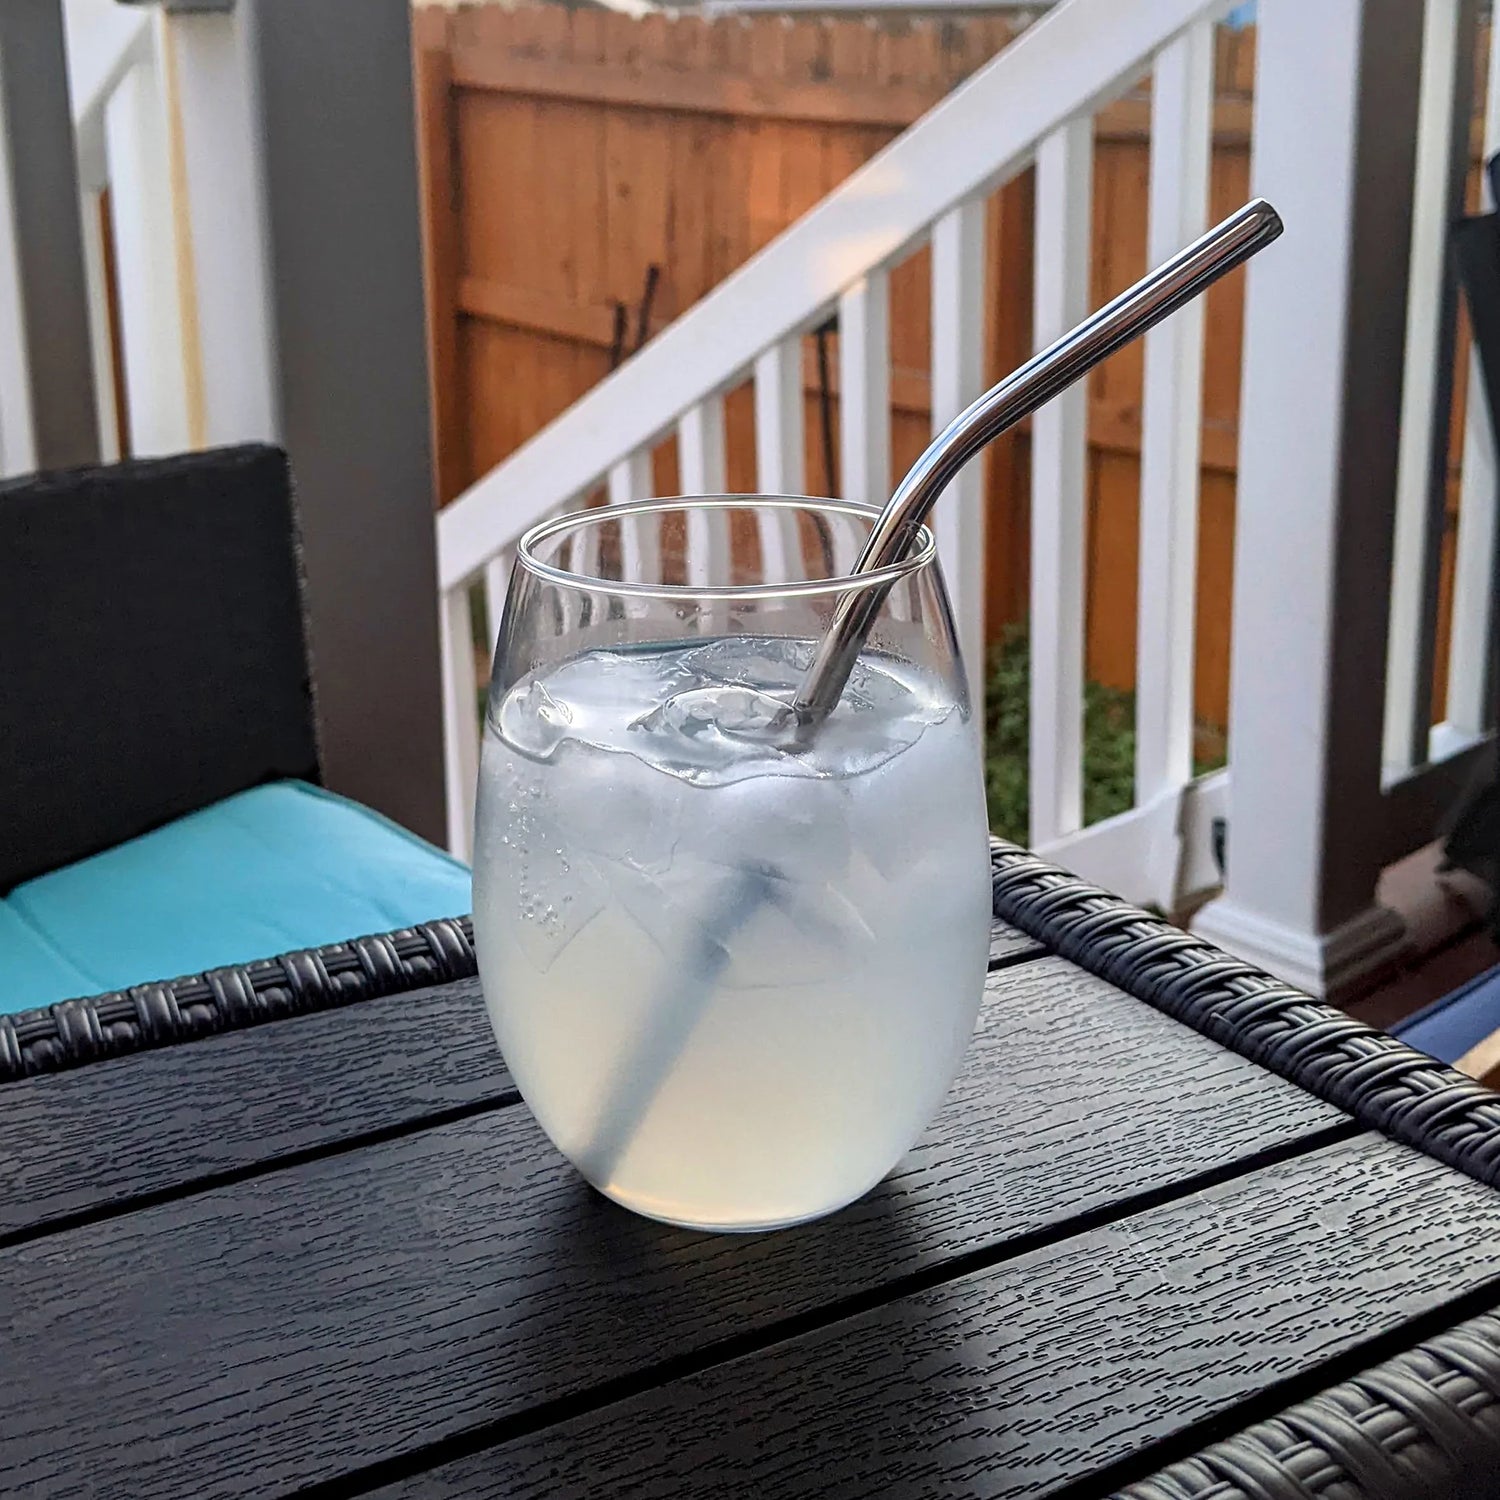 Reusable metal straws for drinks, cocktails, wine, or water.  Includes four straws with free cleaning brush and fabric storage case.